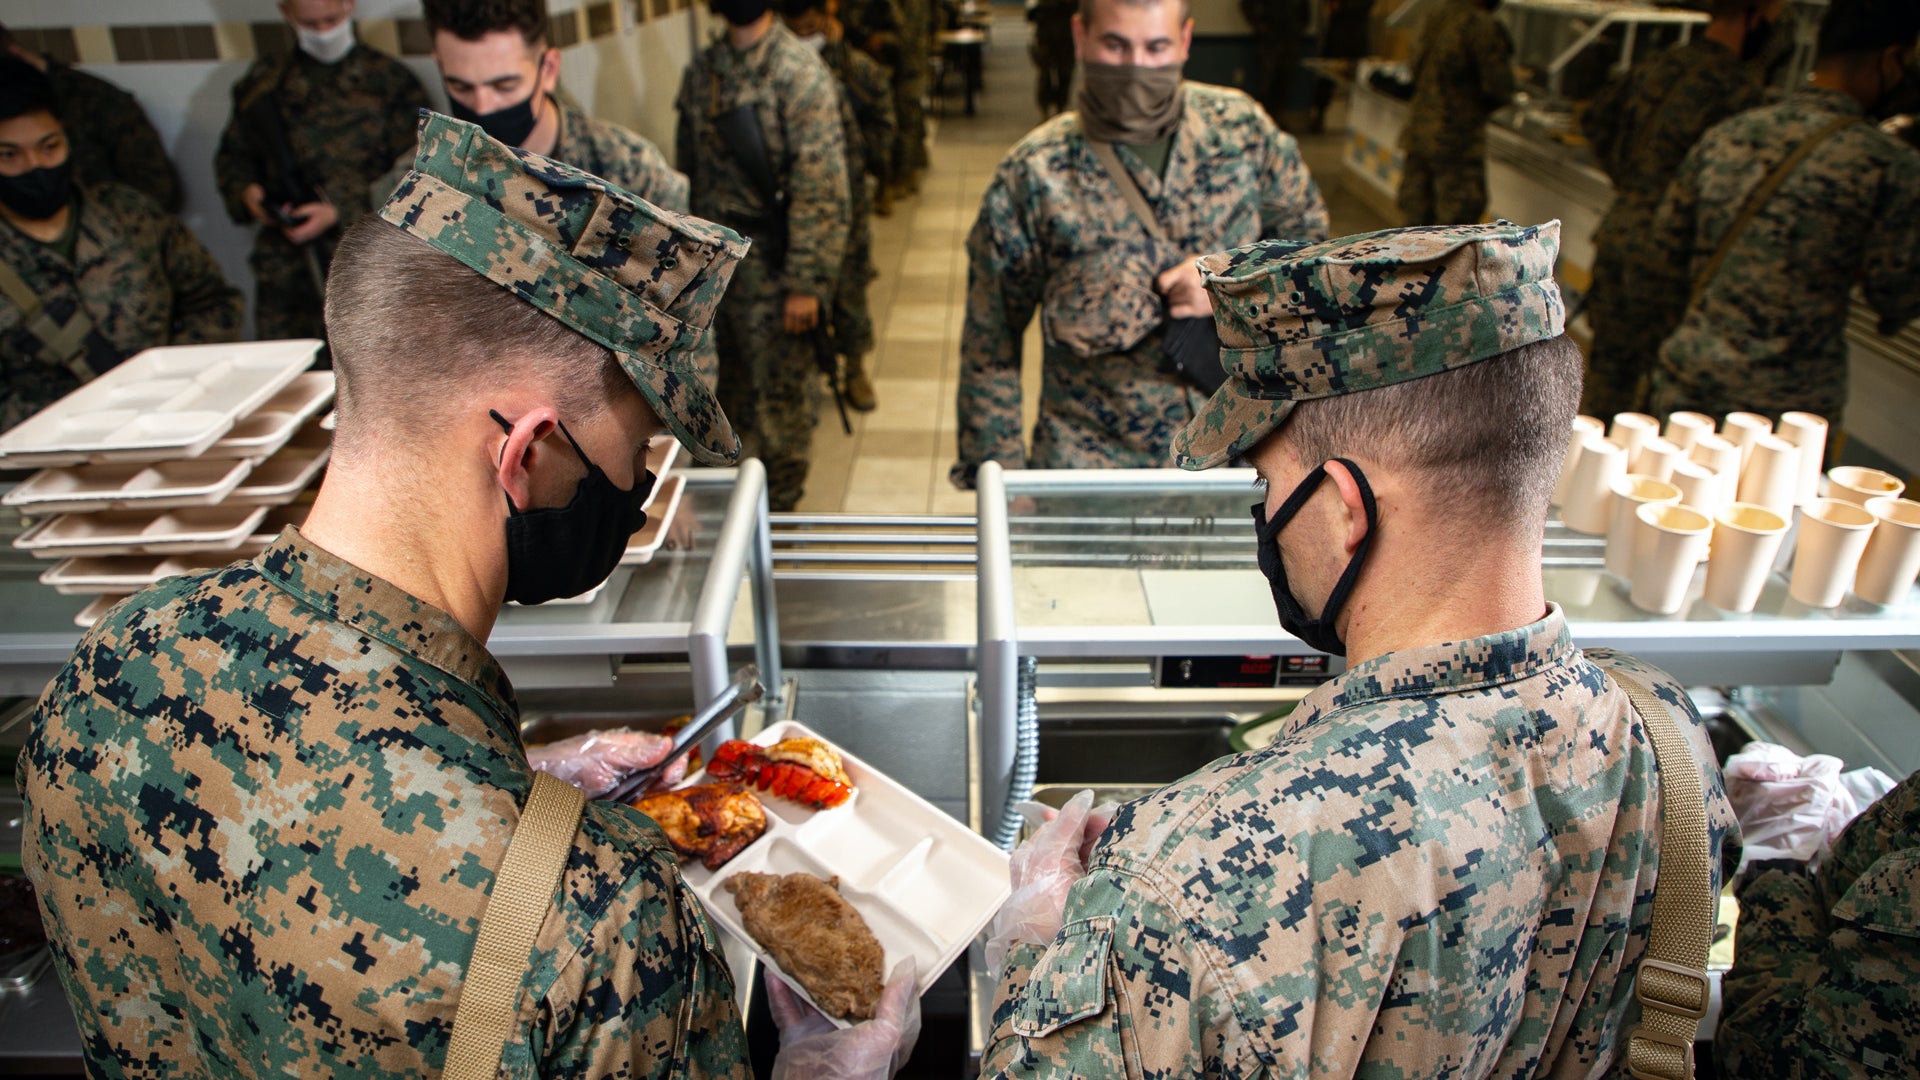 Marines diagnosed with eating disorders more than any other services